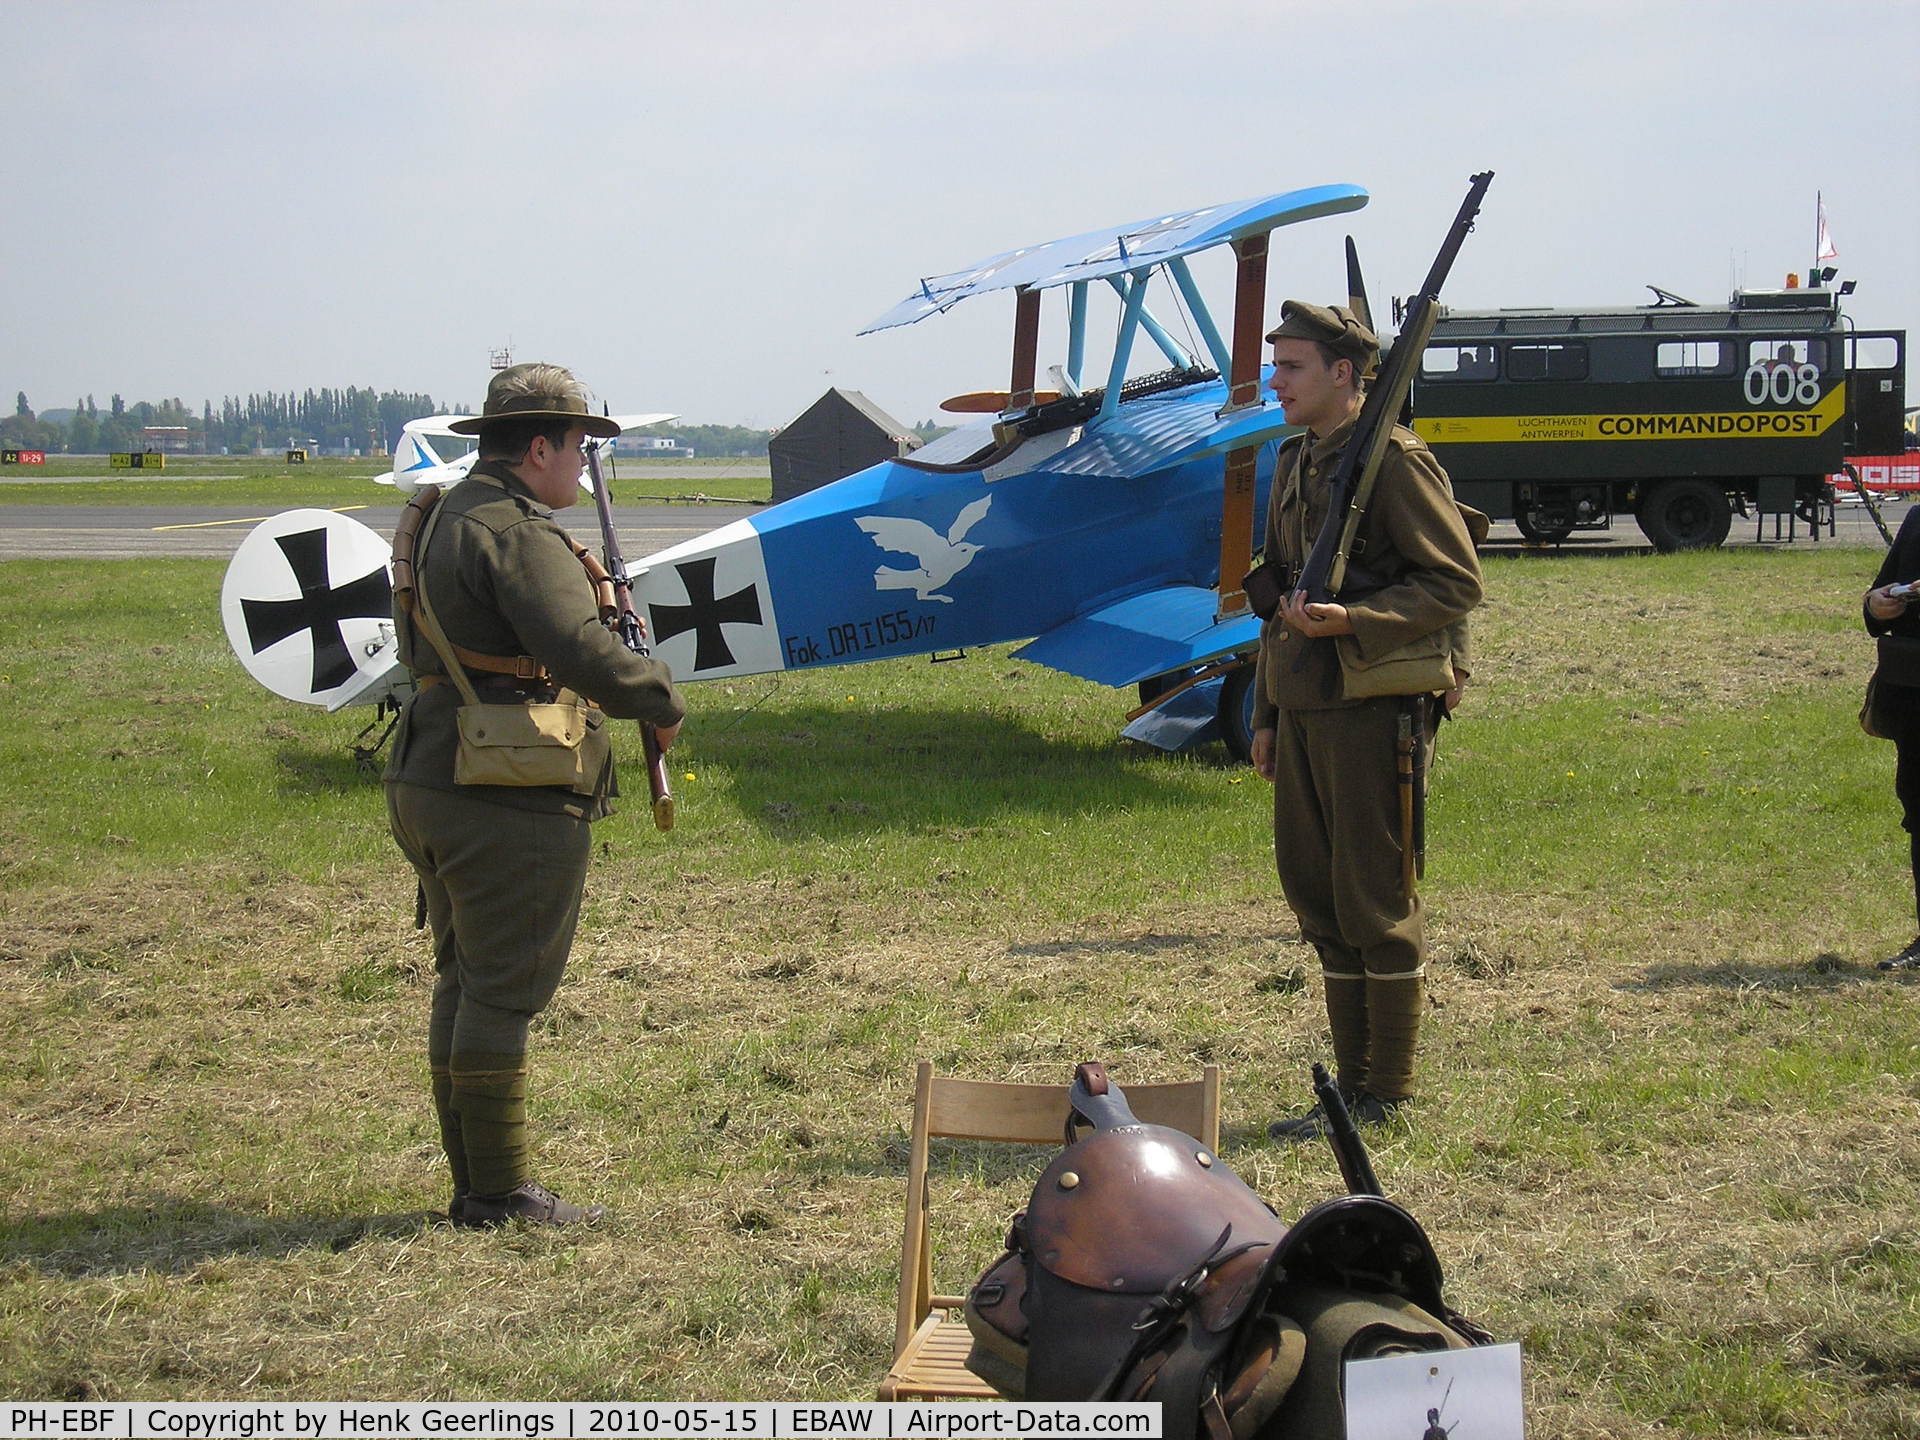 PH-EBF, Fokker Dr.1 Triplane Replica C/N 155-17, Stampe Fly In , may 2010 , Deurne.

Fokker Dr.1 with the Battleground Belgium Historic Group